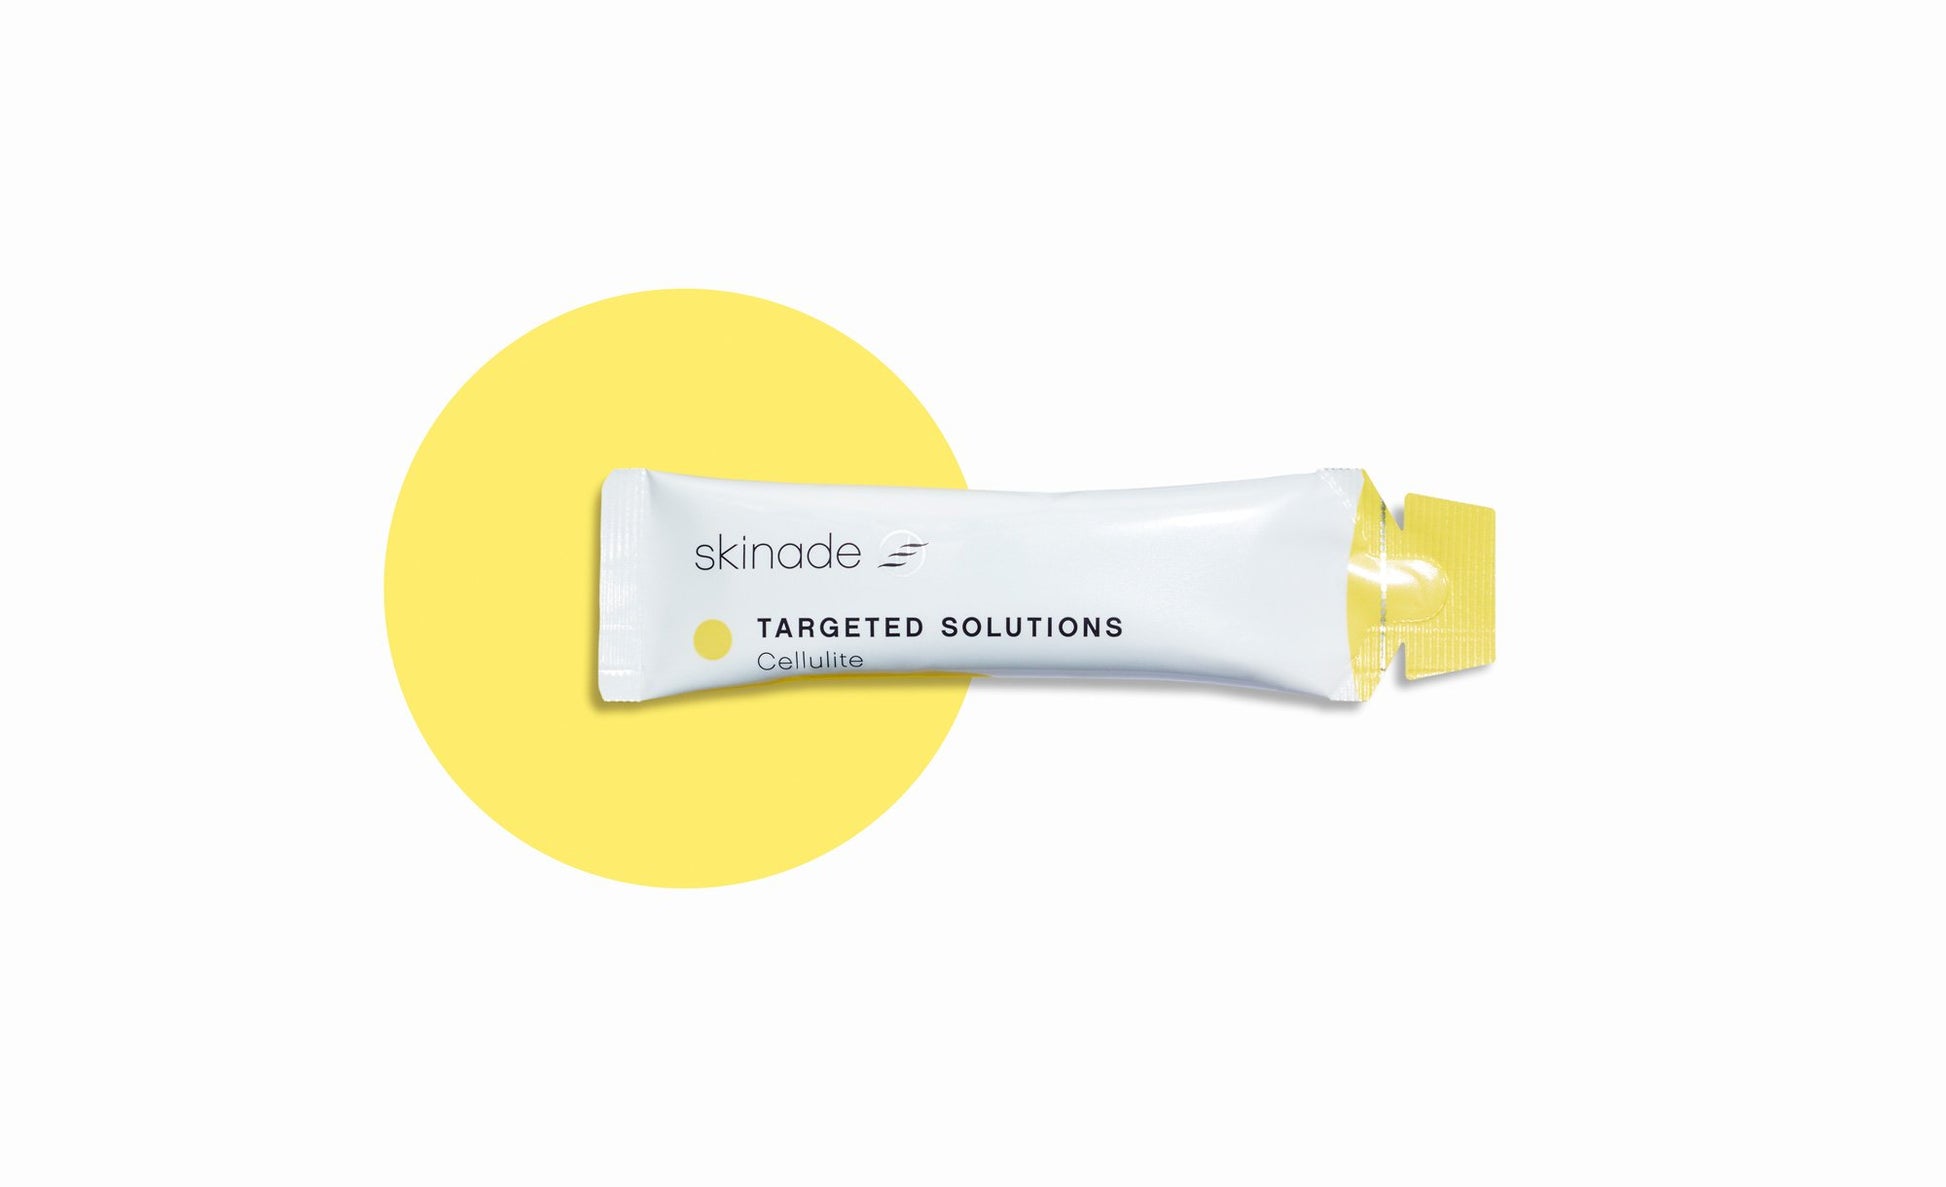 Skinade-TS-Cellulite-03